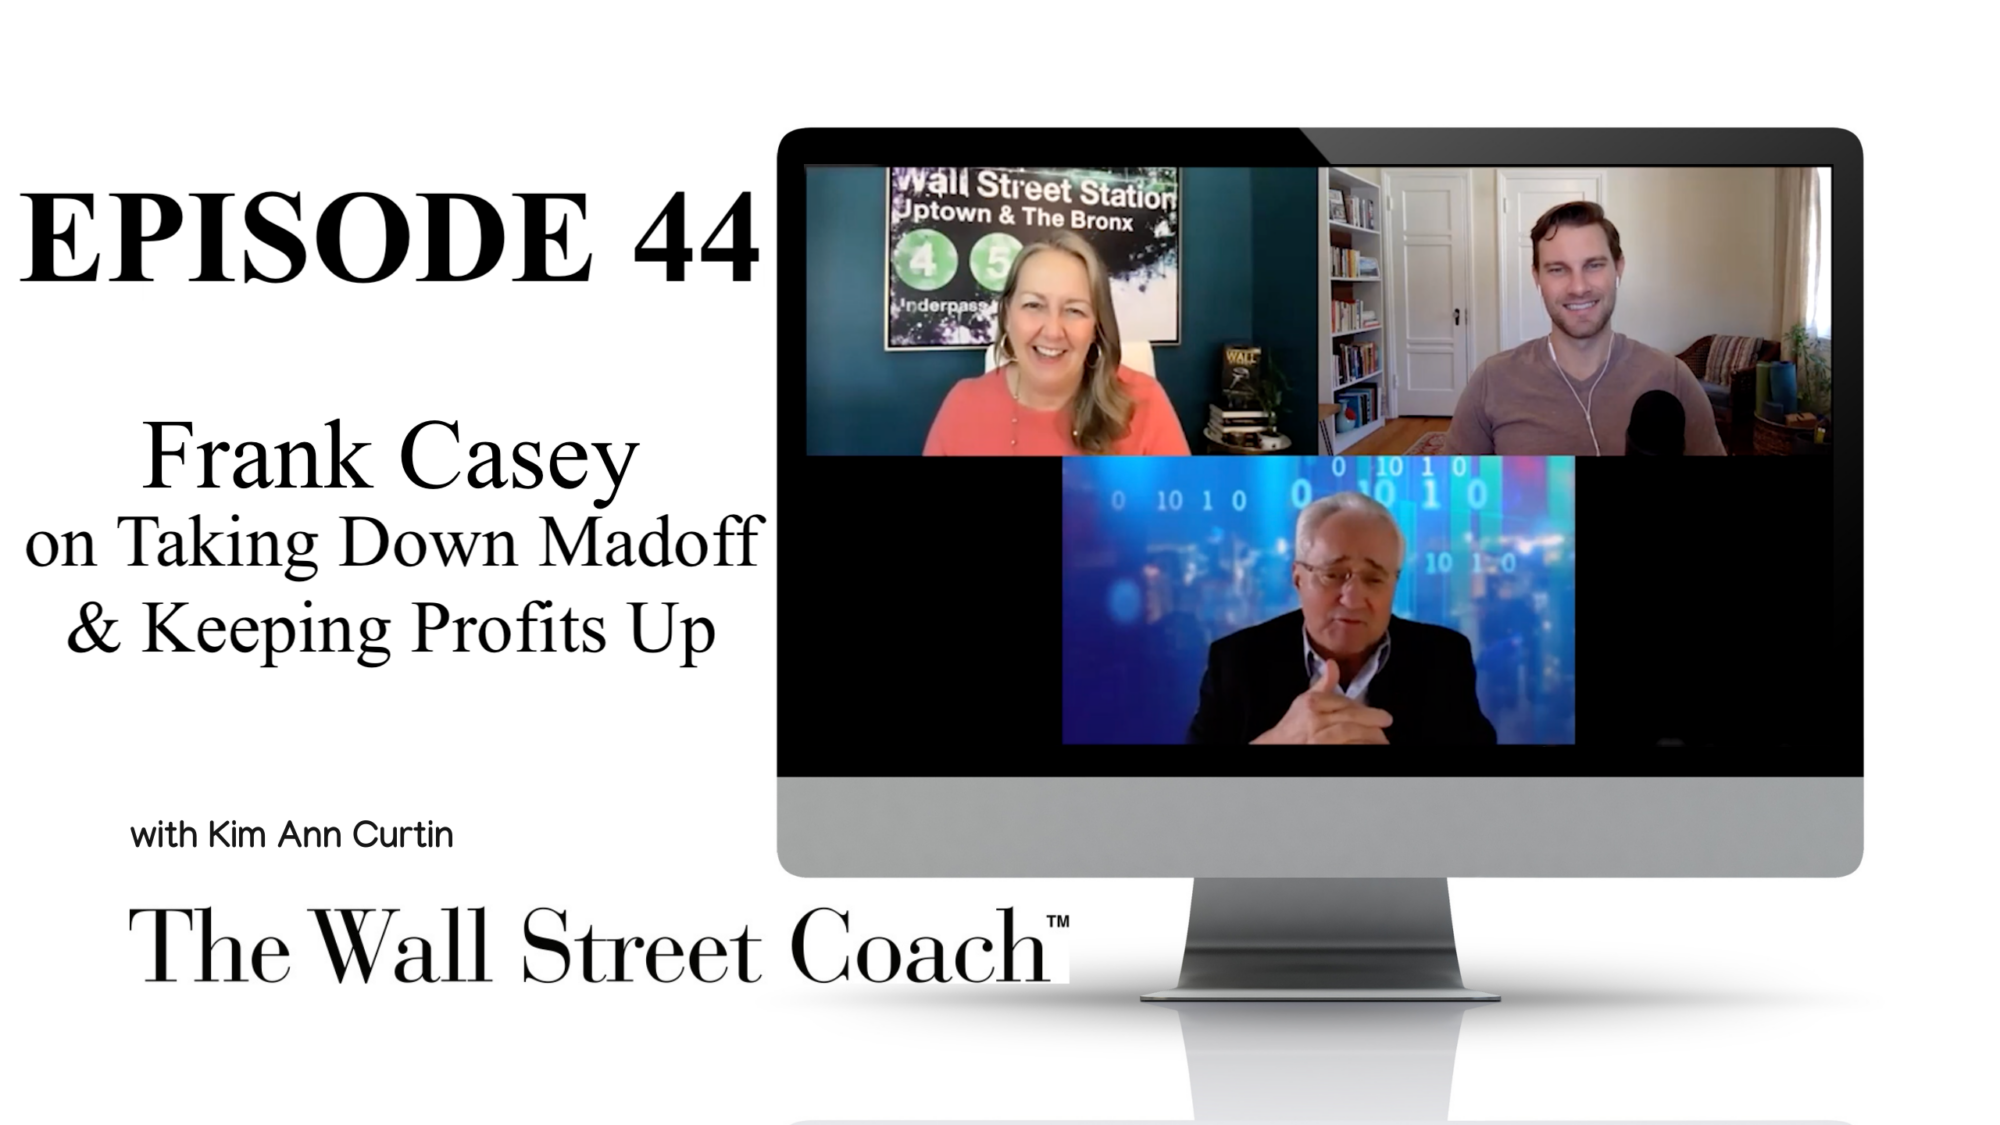 Episode 44: Frank Casey on Taking Down Madoff and Keeping Profits Up